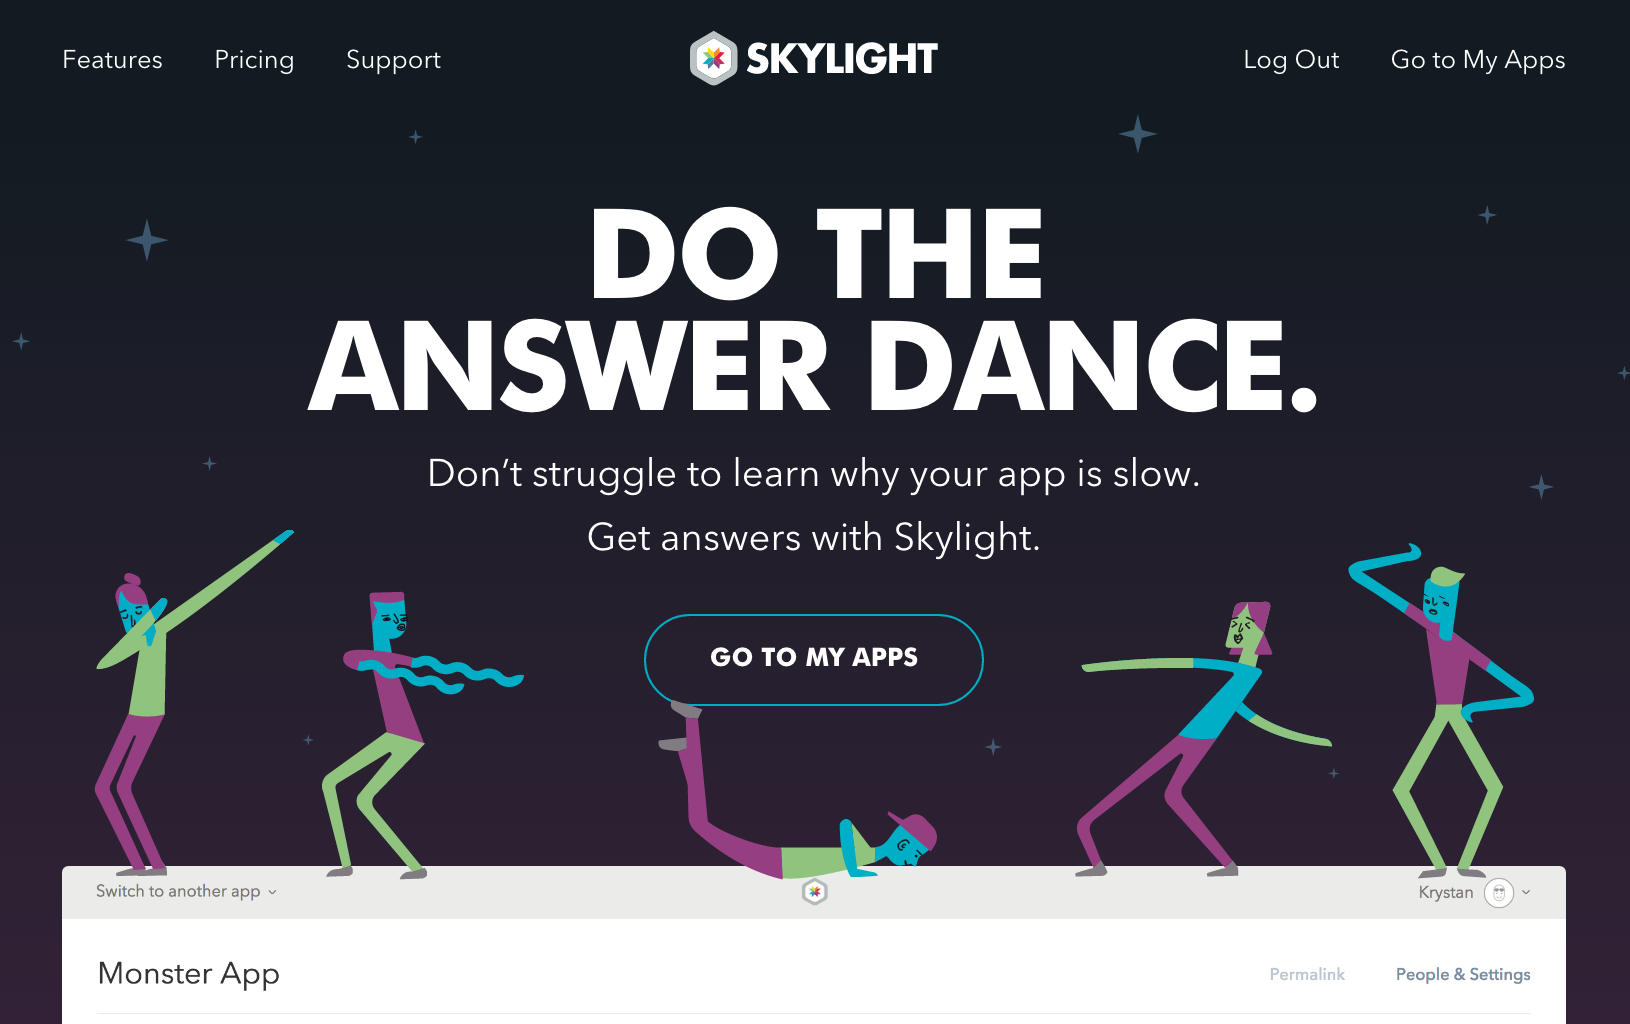 A screenshot of the new Skylight marketing page